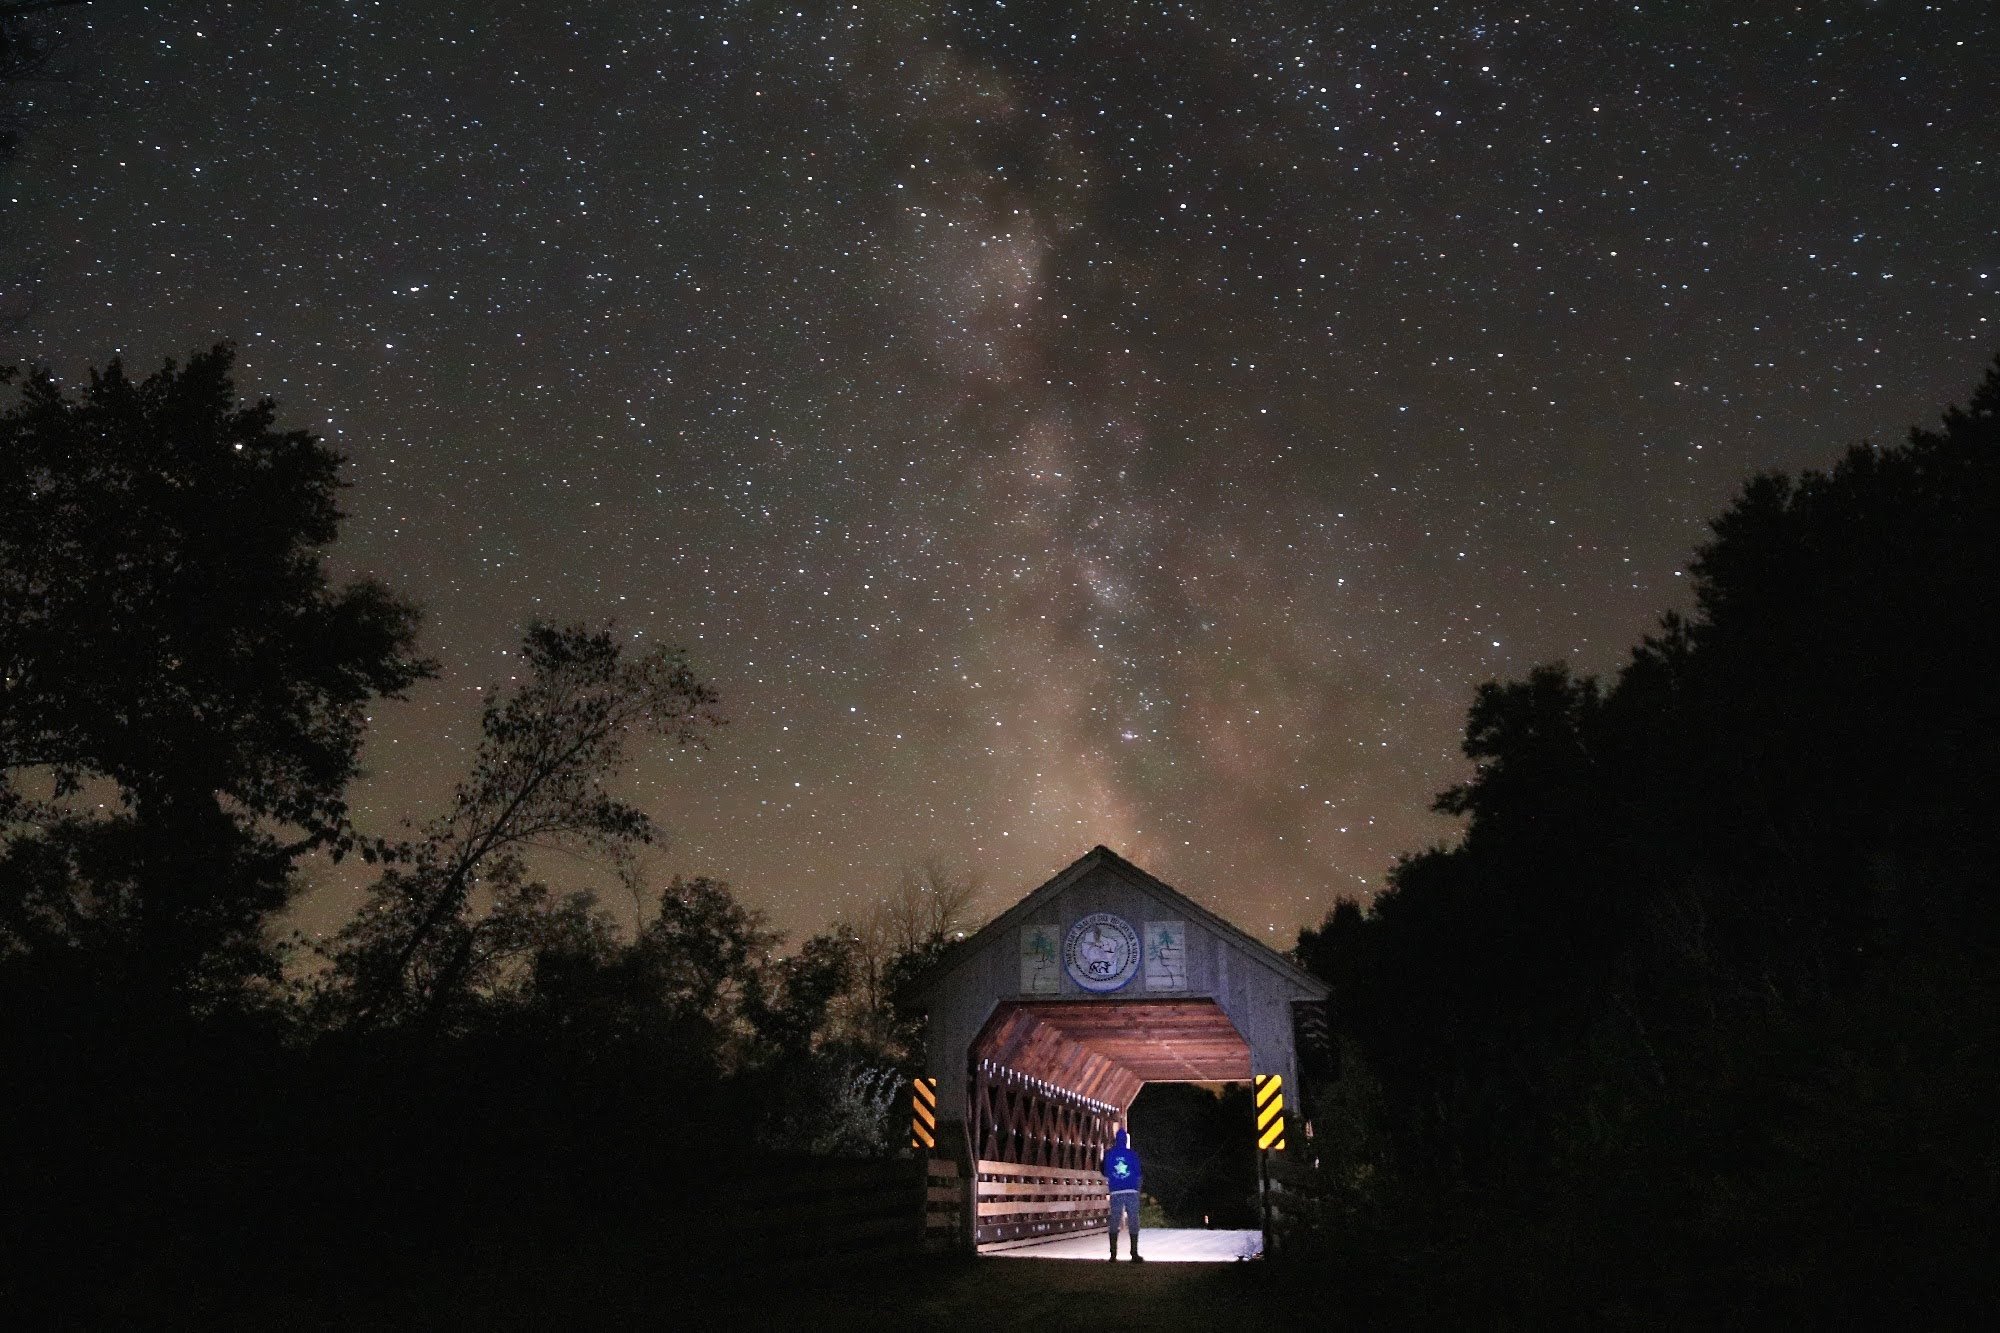  One of the covered bridges in the Kickapoo Valley Reserve under the Milky Way. Photo by John Rummel                                          